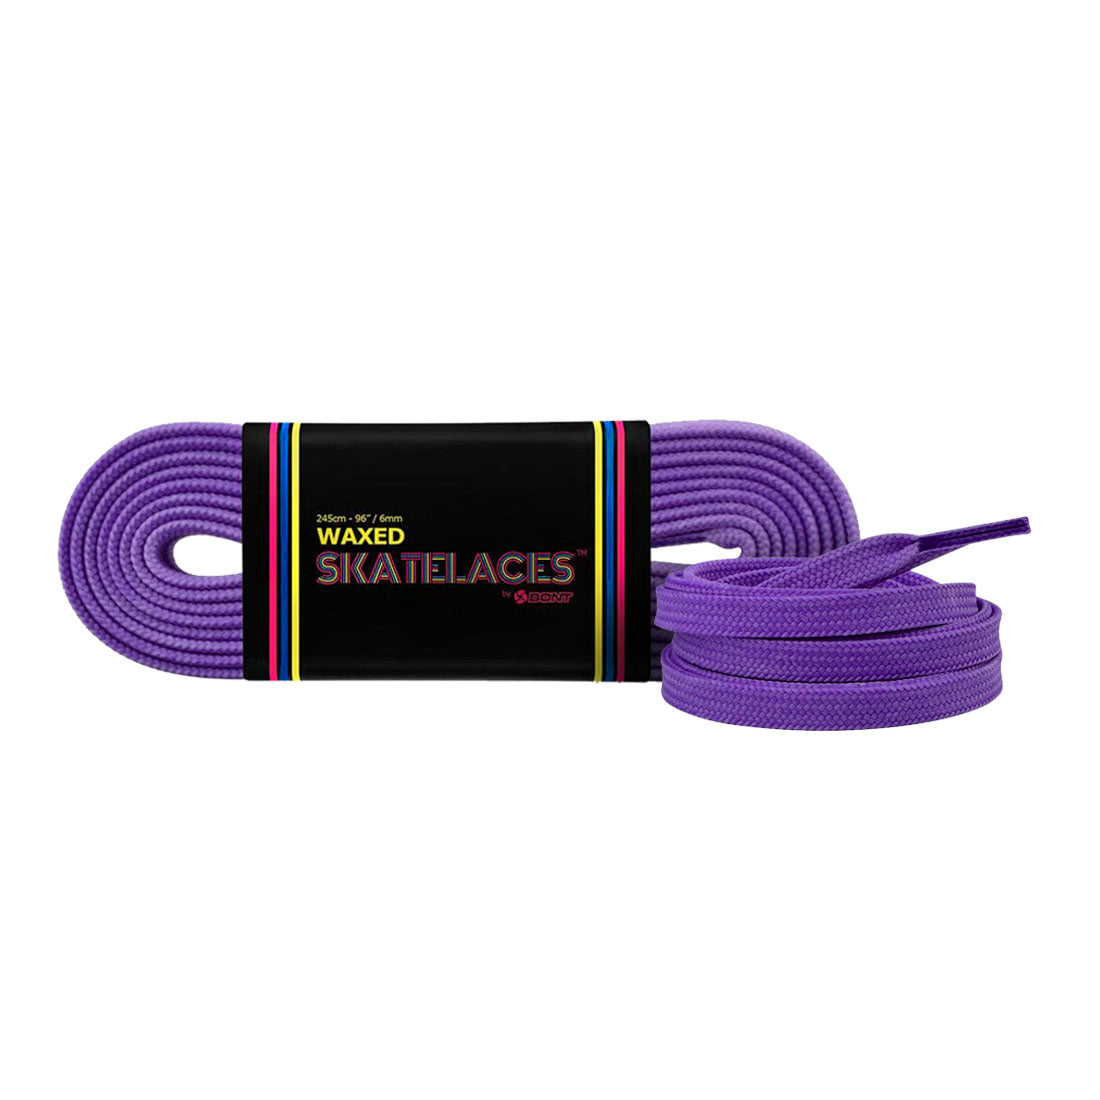 Bont Waxed 8mm Laces - 200cm/79in Dare You Purple Laces